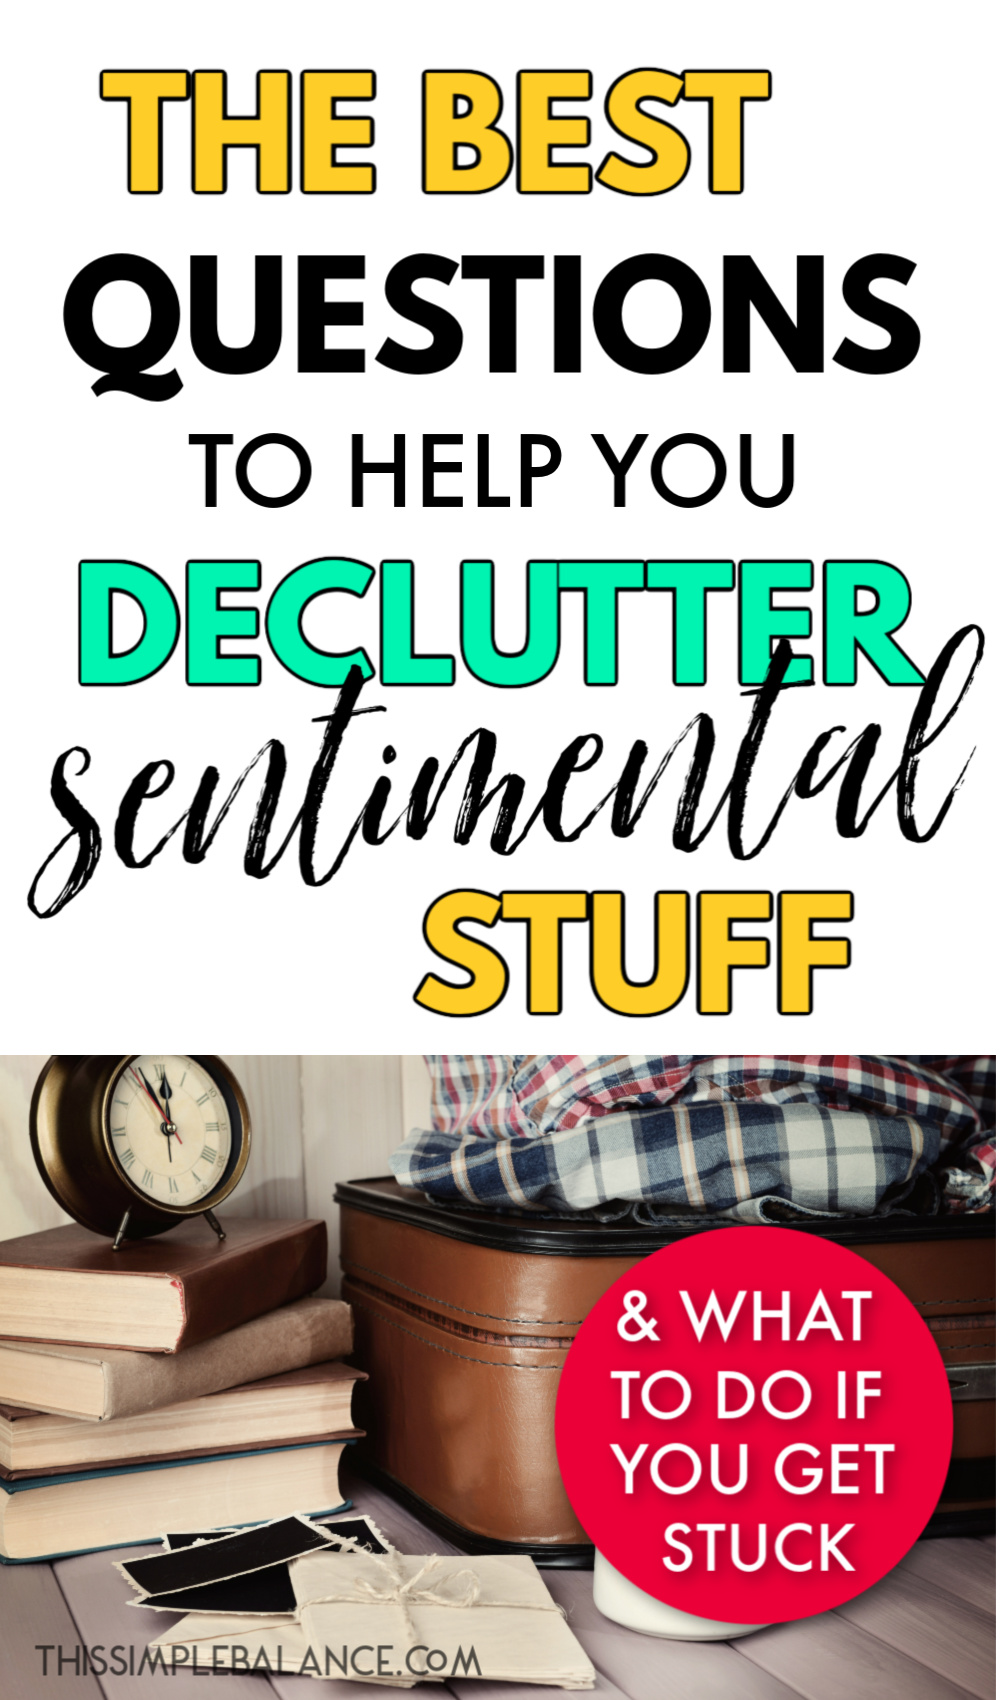 sentimental items like old photographs, shirts and books, with text overlay, "the best questions to help you declutter sentimental stuff & what to do if you get stuck"